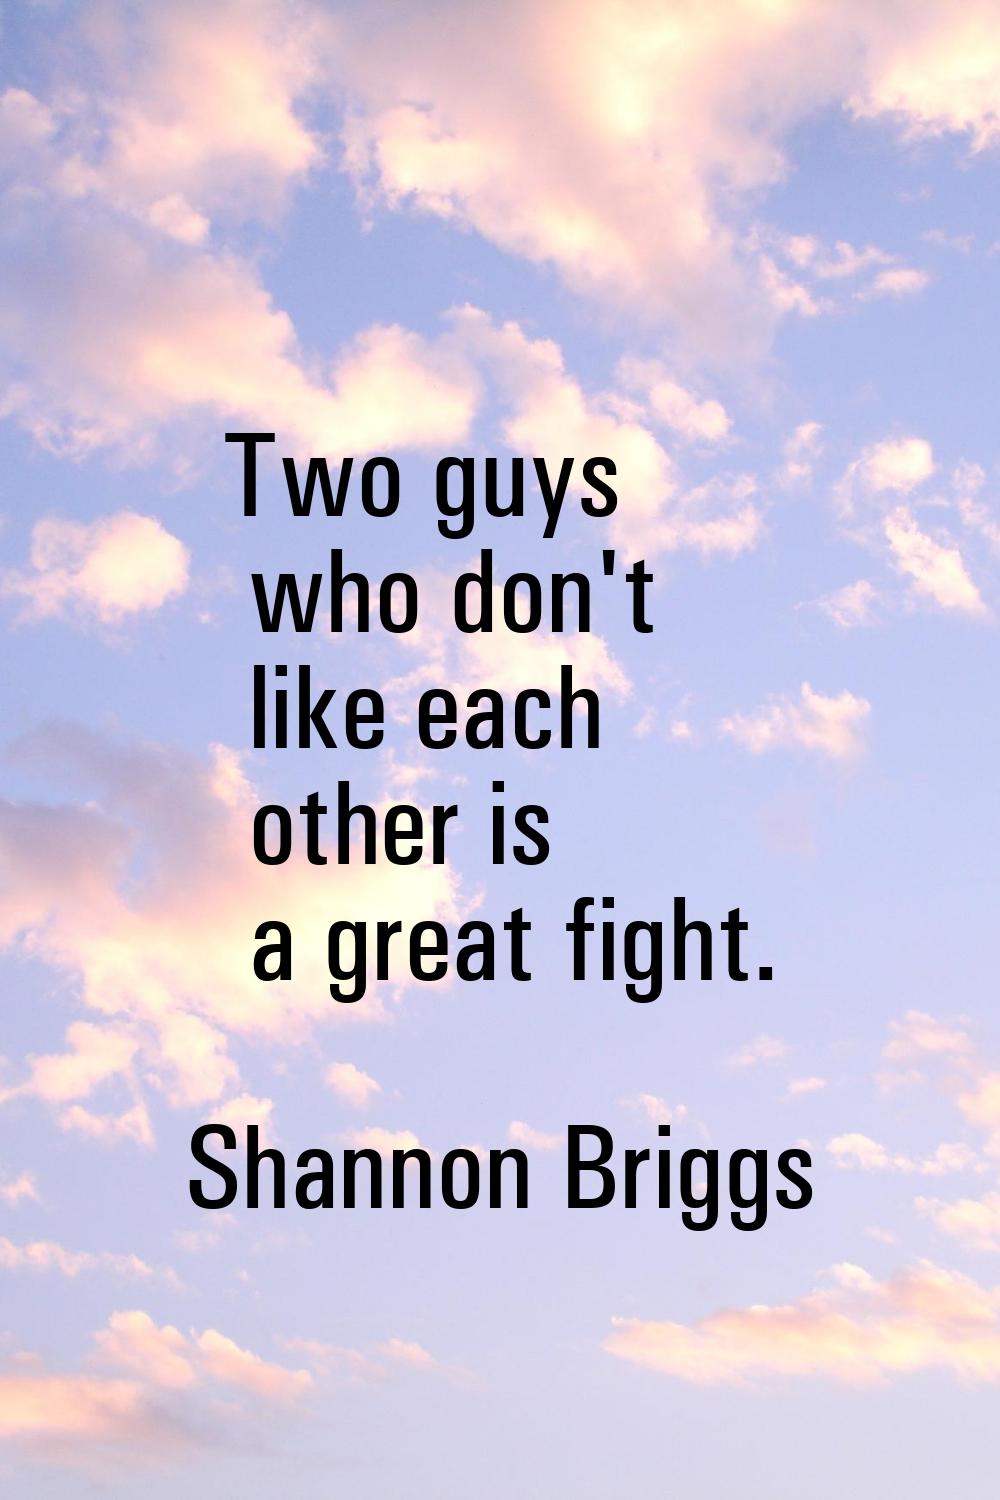 Two guys who don't like each other is a great fight.